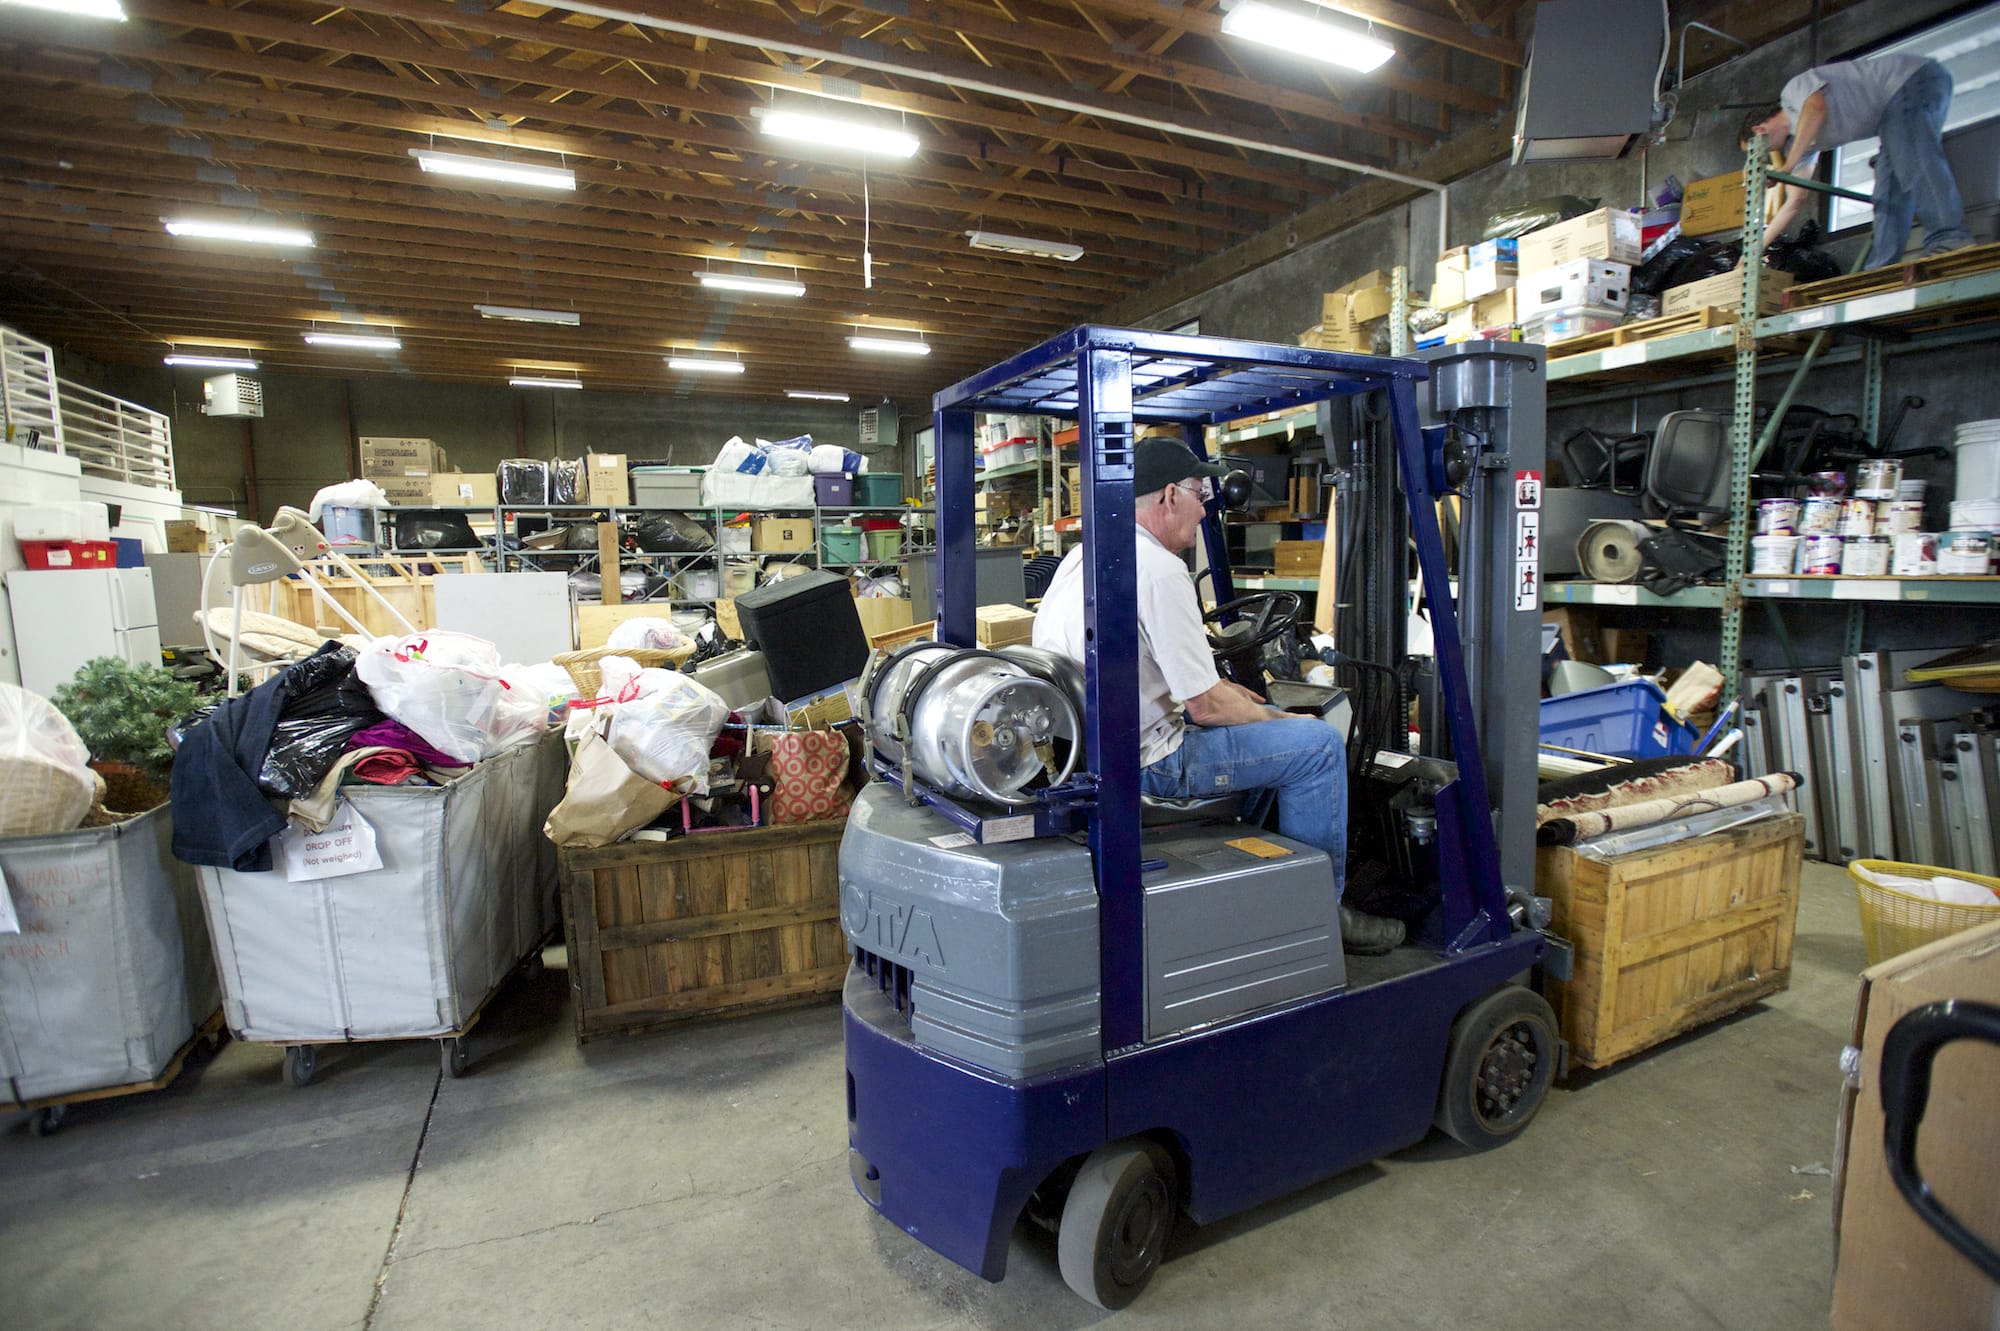 Warehouse workers organize donated goods at the ARC storage facility in 2014. The organization hopes to open a retail space in Vancouver Plaza, which is less than a mile from the storage warehouse.